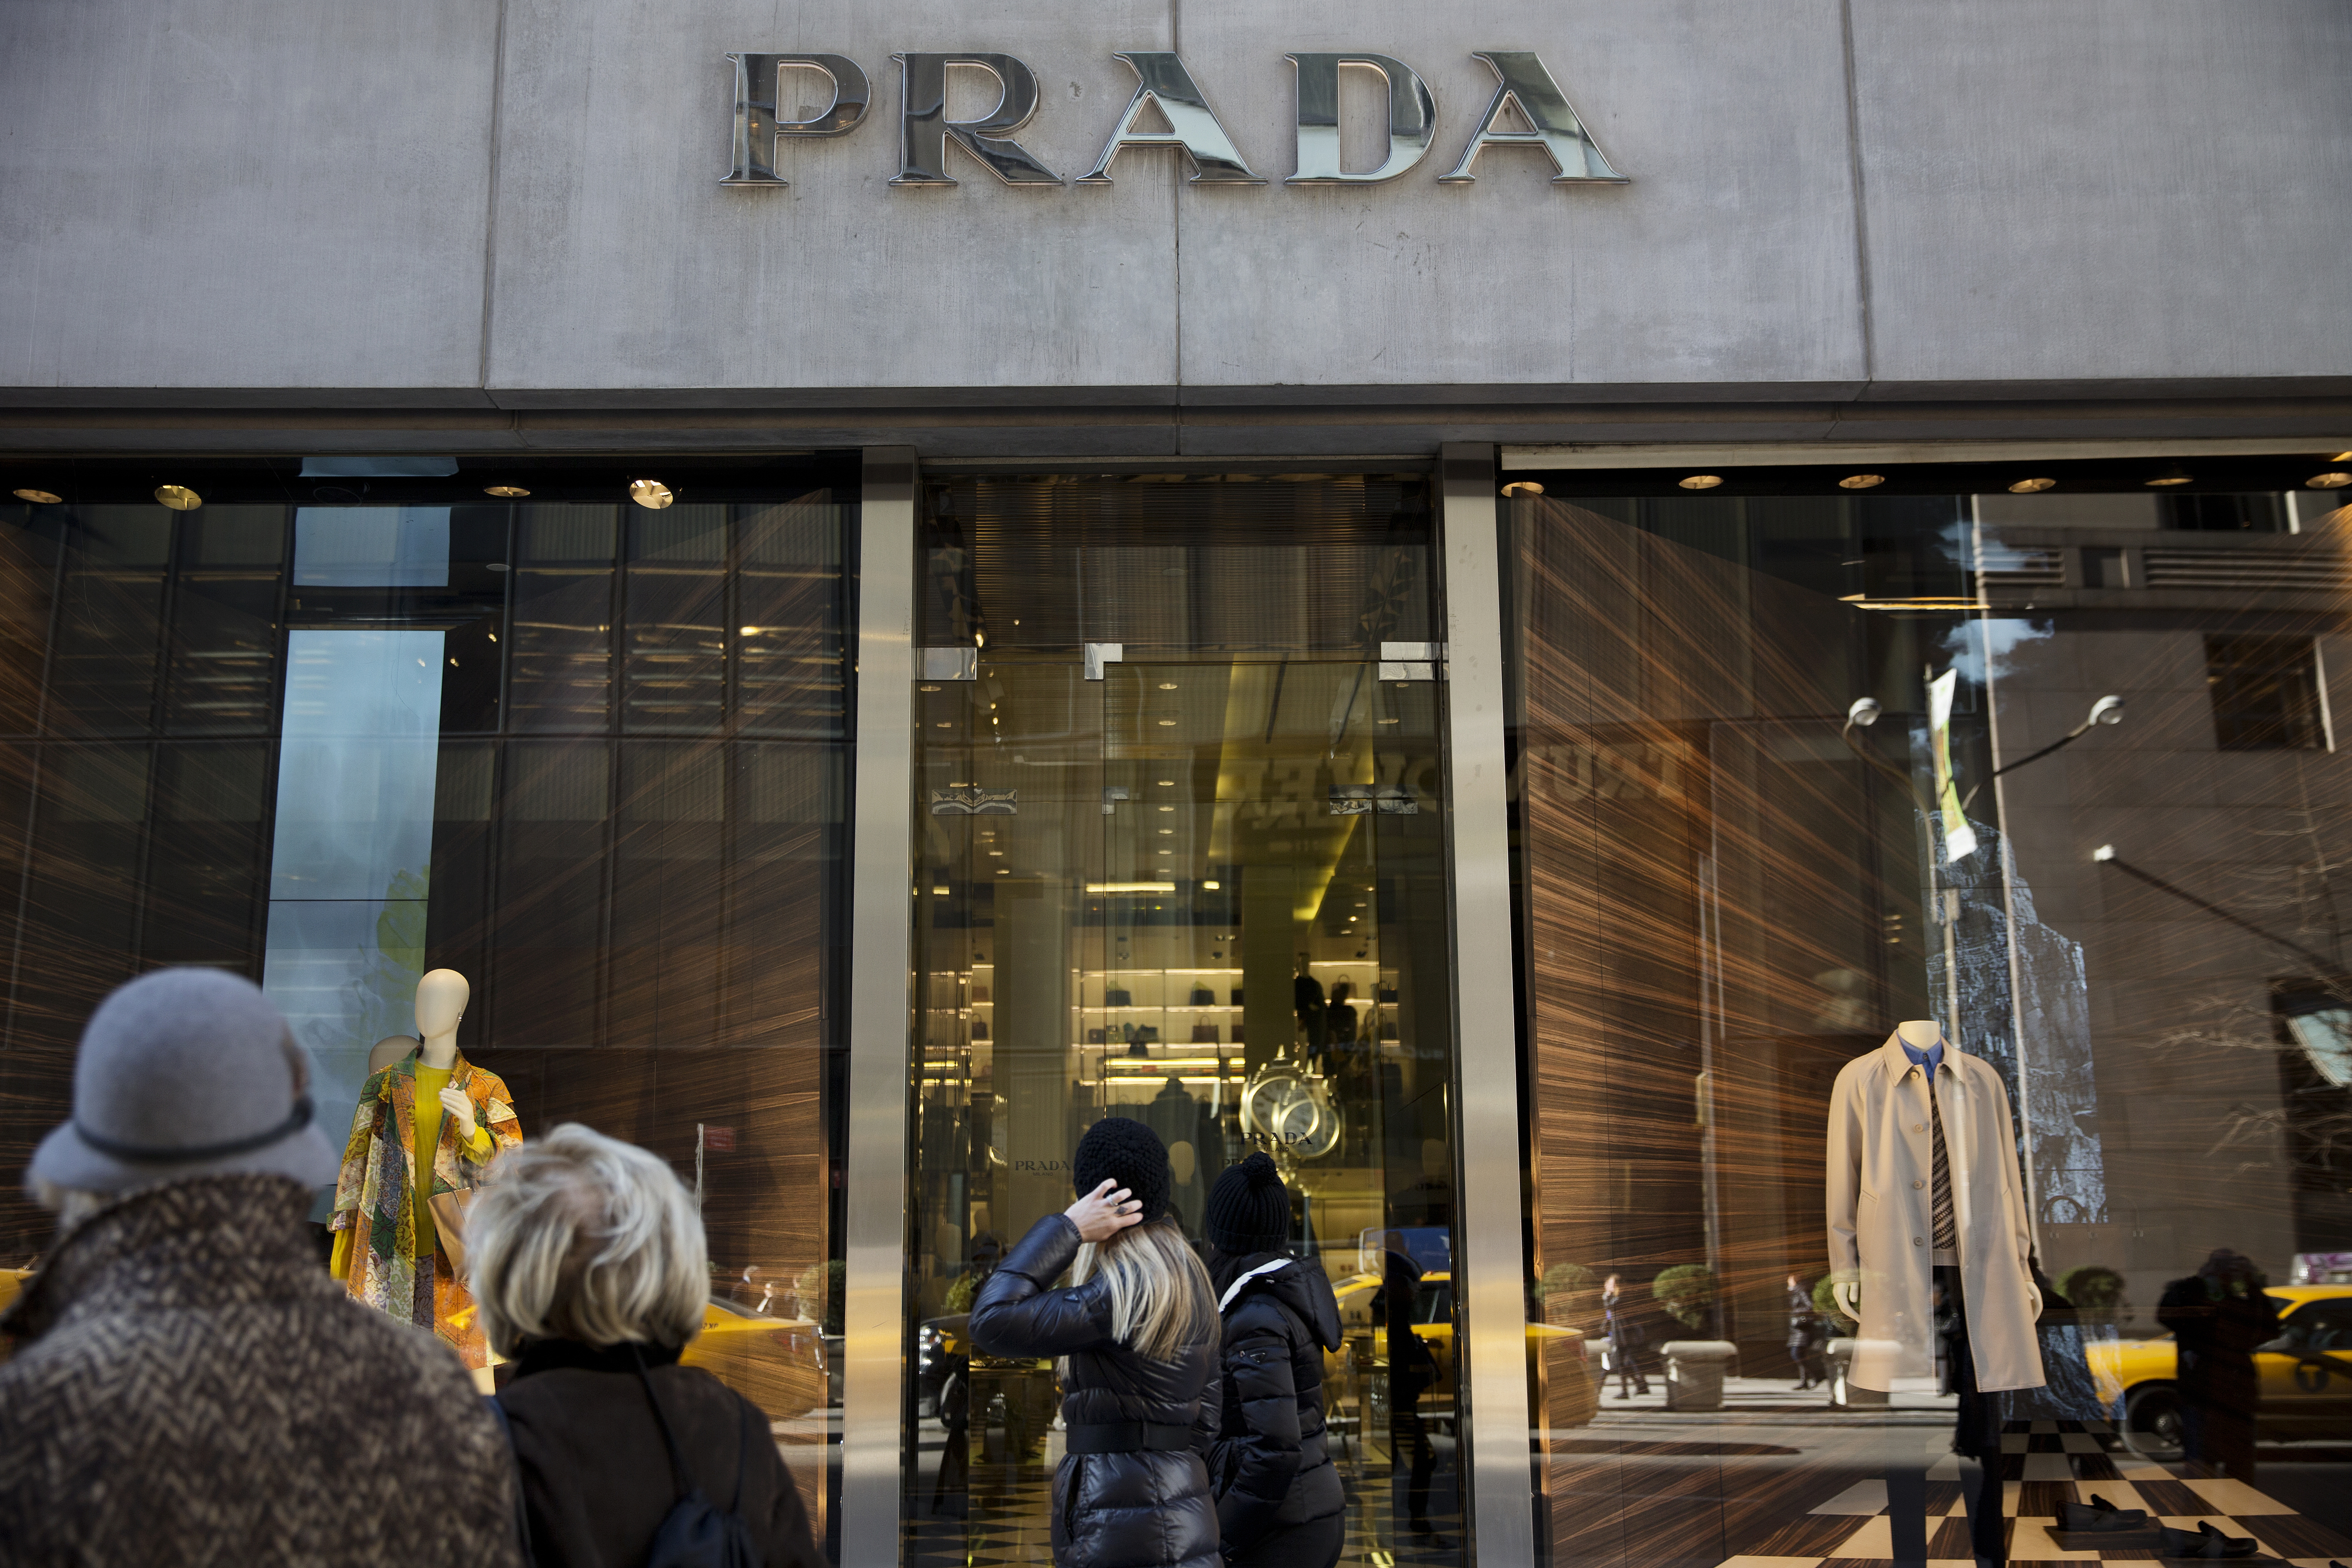 Prada loses sight of wow factor in expansion push | South China Morning Post